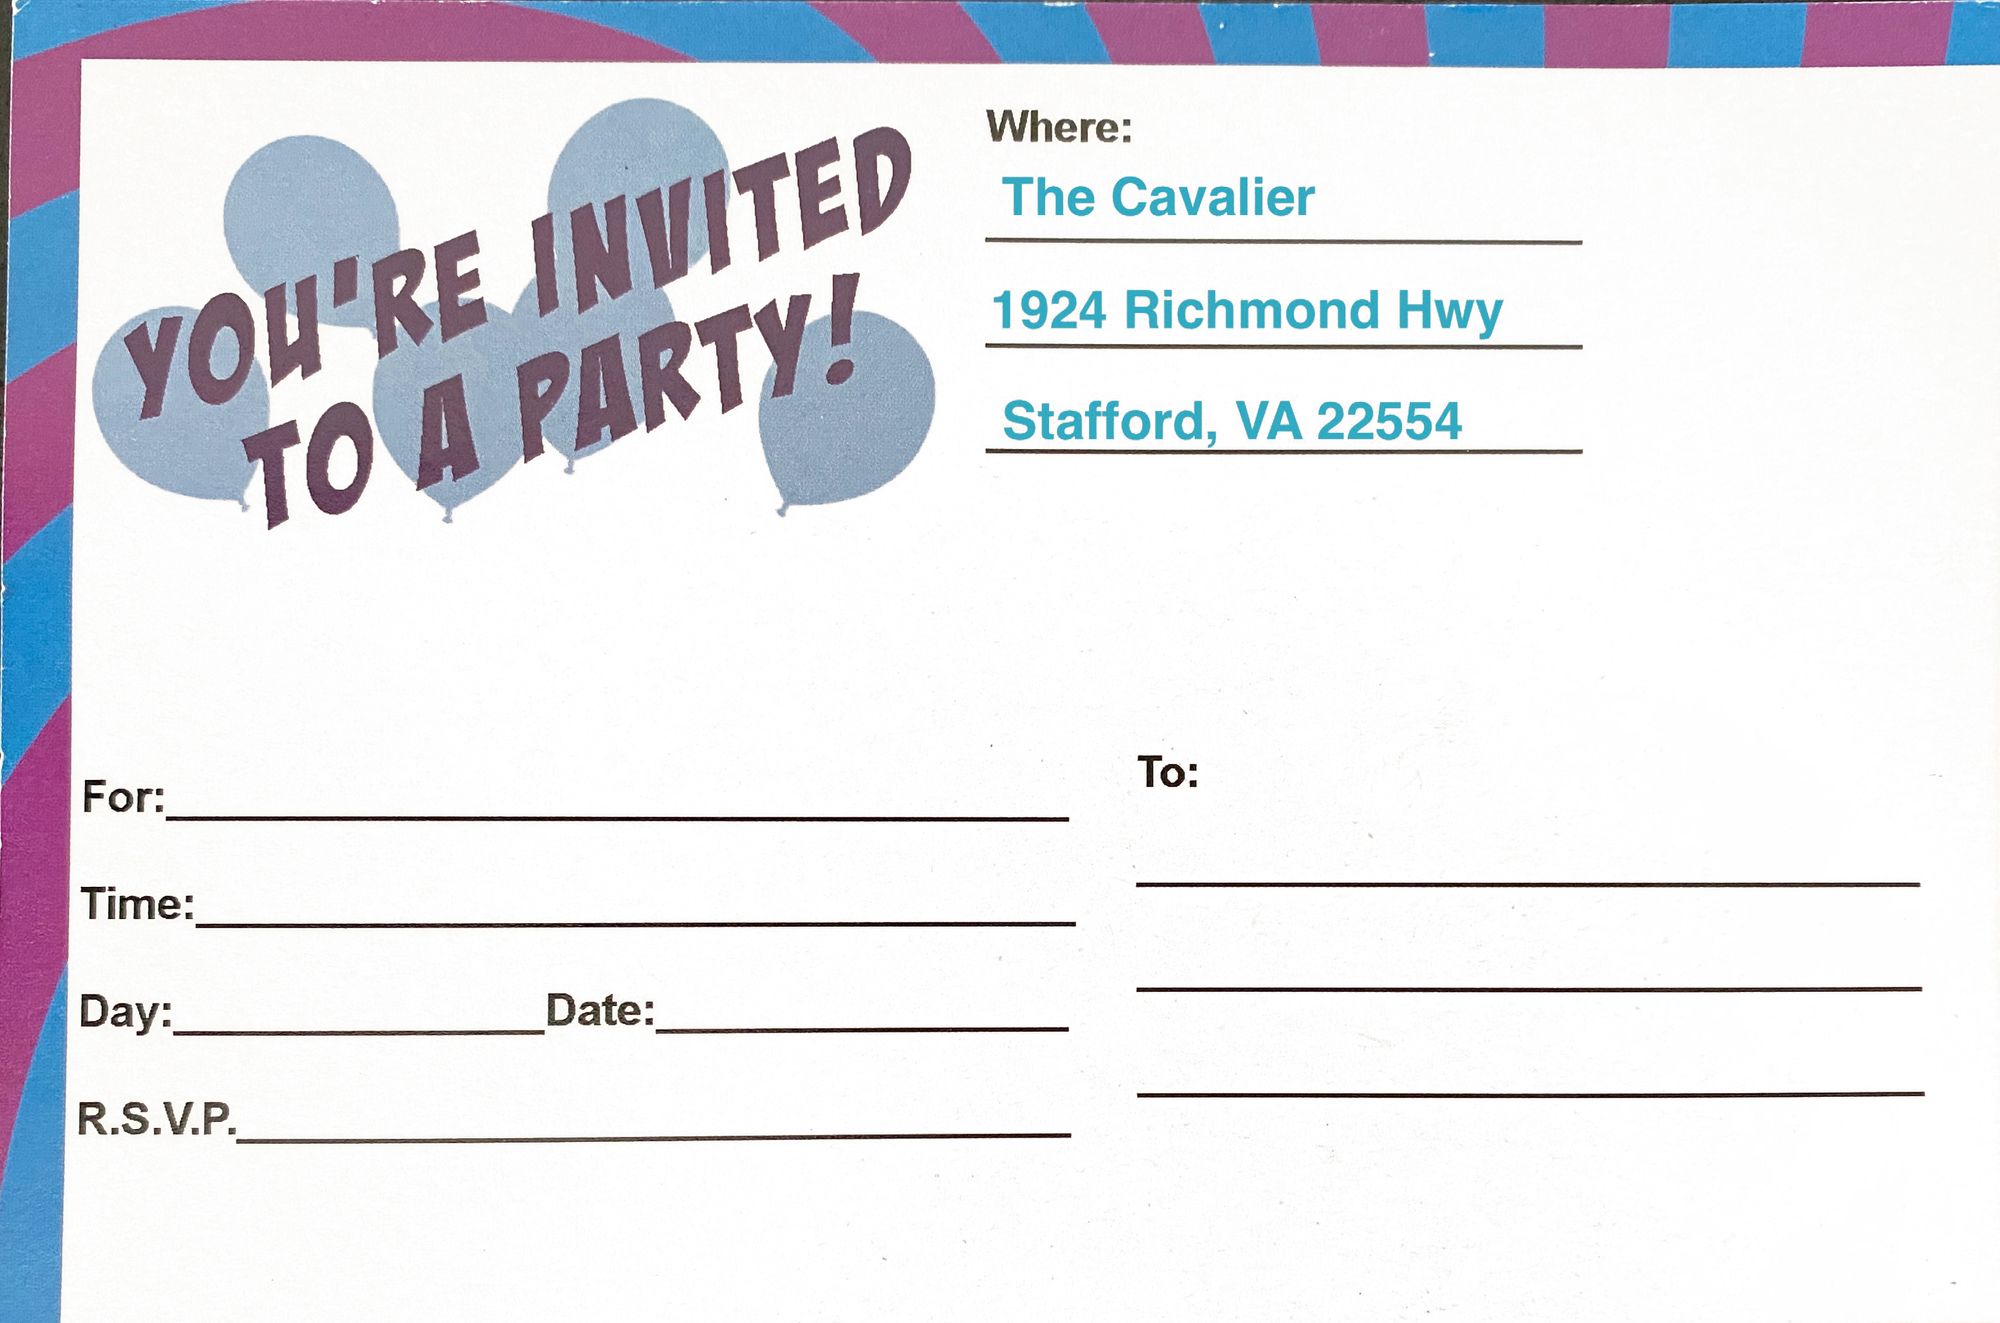 Print out and send your own invitations